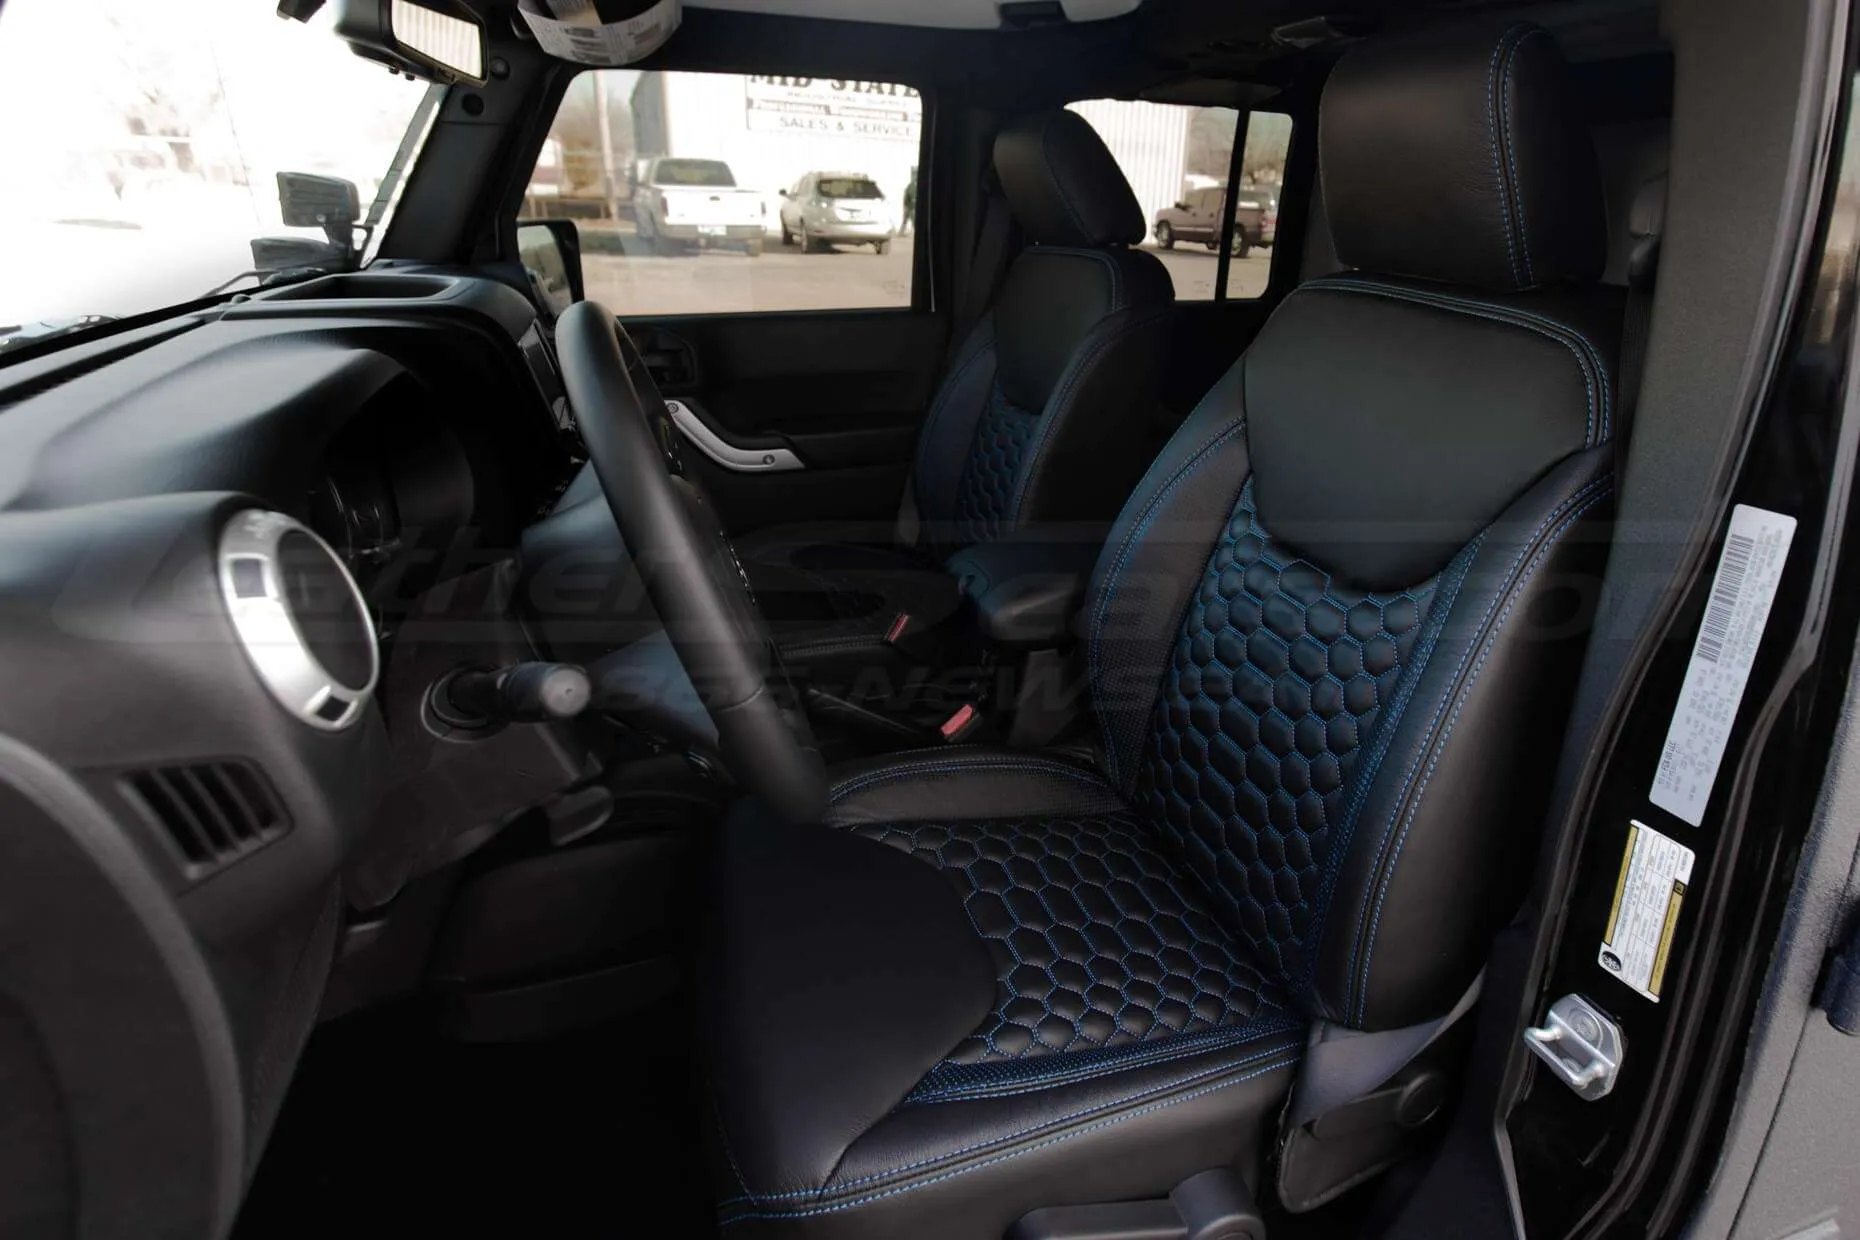 2013-2018 Jeep Wrangler Bespoked Leather Seats Installed- Black & Cobalt - Front interior from drivers side